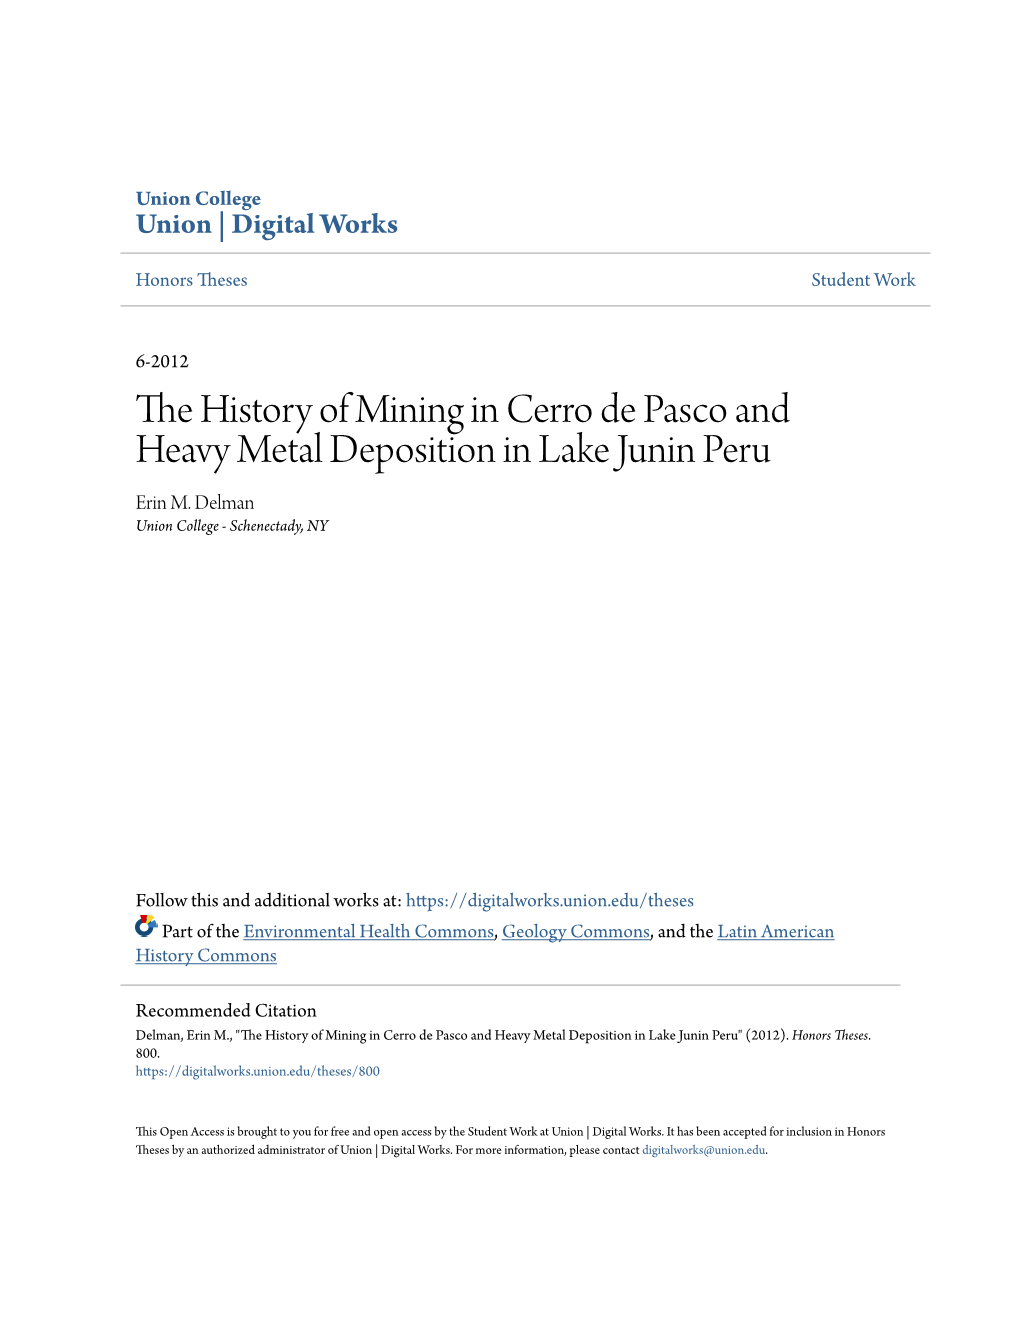 The History of Mining in Cerro De Pasco and Heavy Metal Deposition in Lake Junín Peru